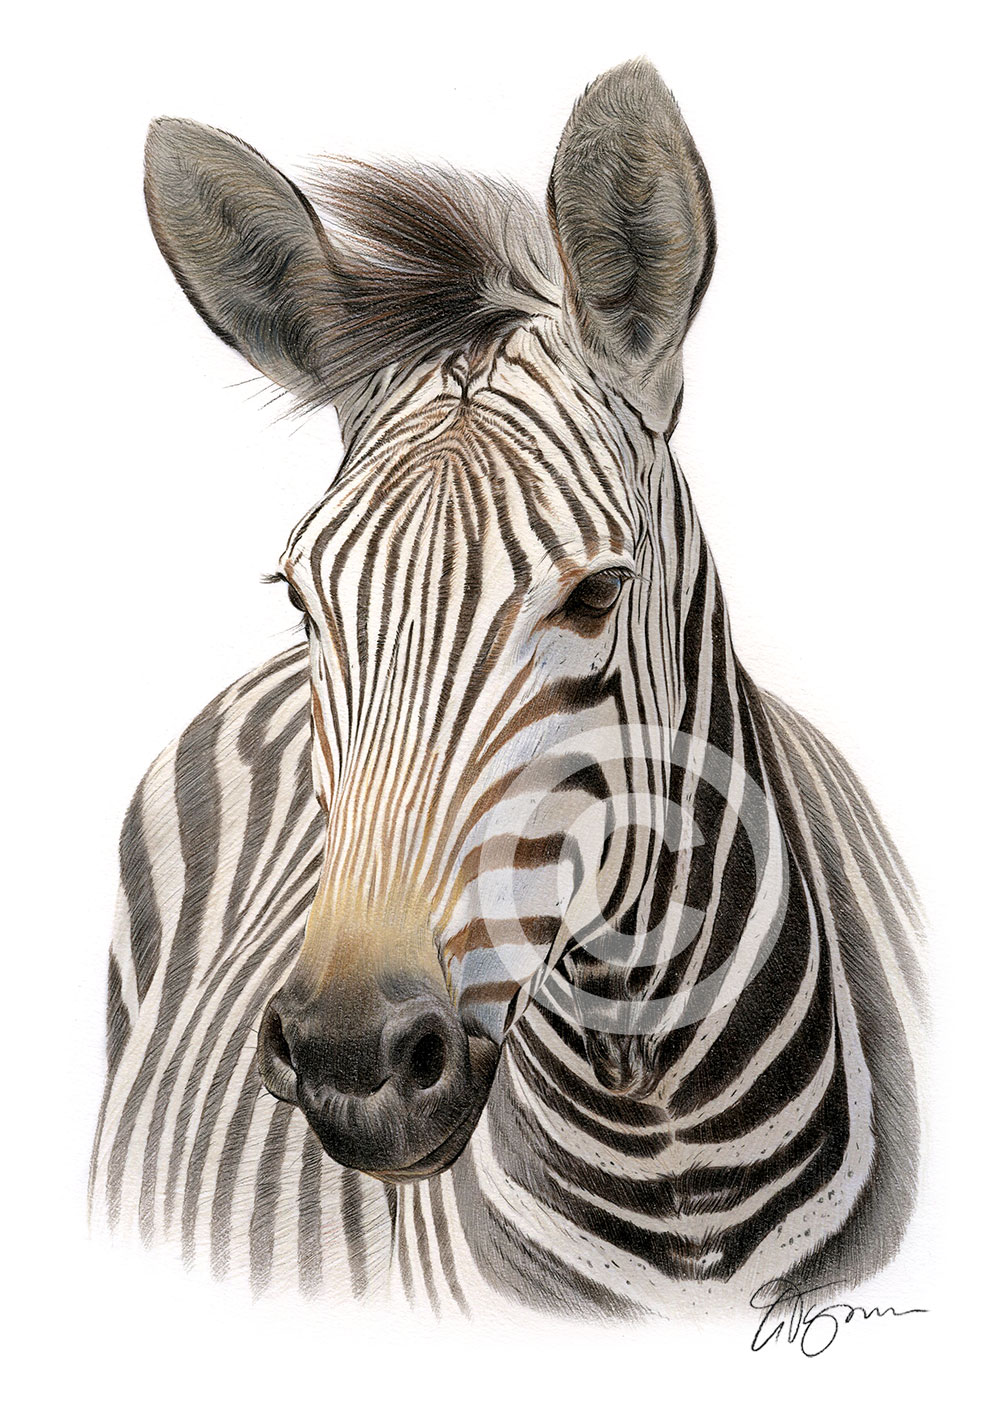 Colour pencil drawing of a zebra by artist Gary Tymon